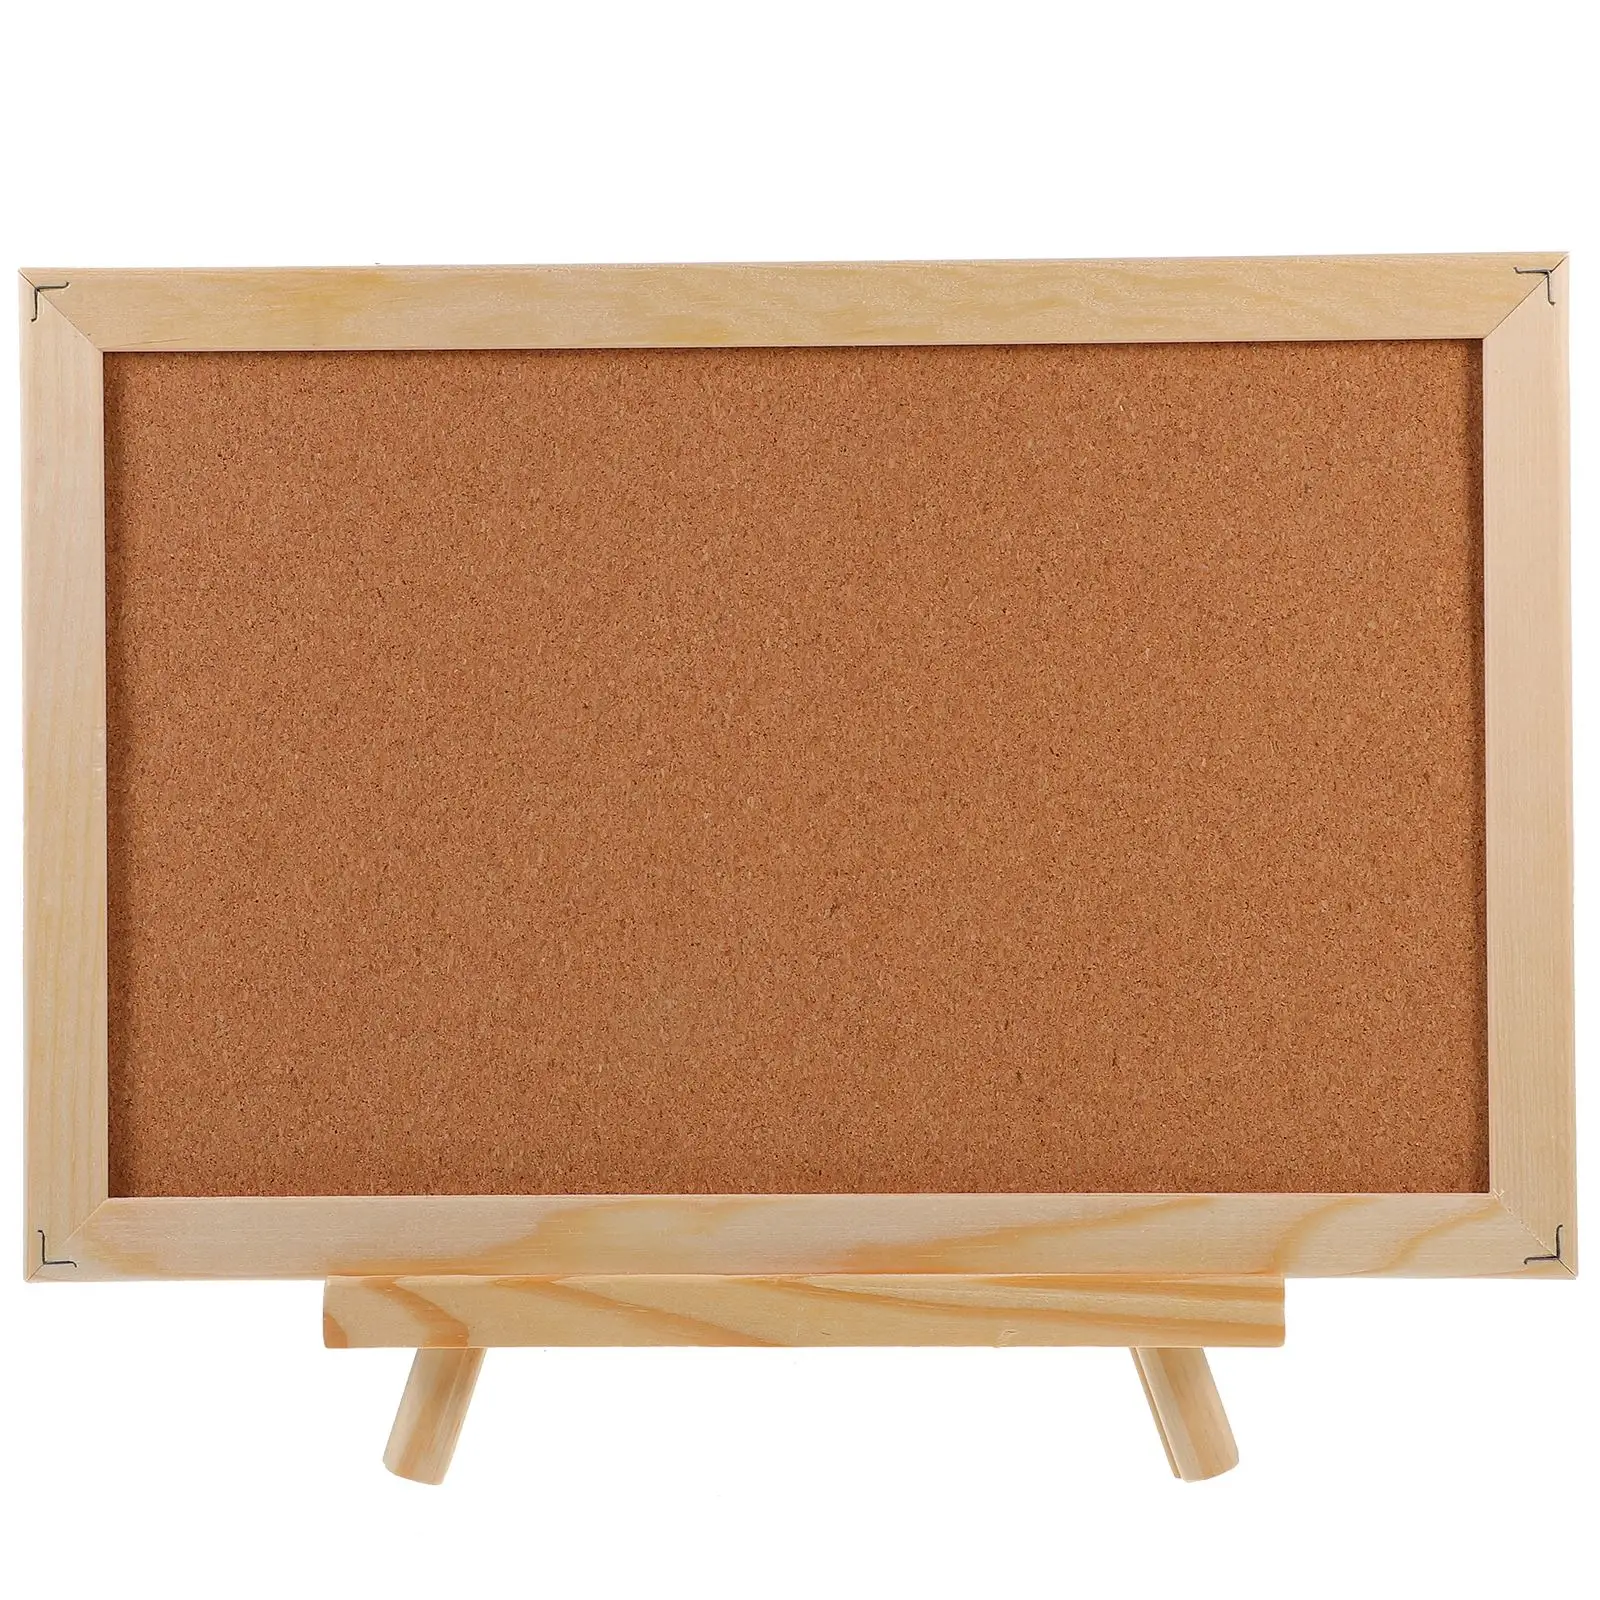 Durable Cork Wood Wall Hanging Message Bulletin Board Frame Notice Note Memo Board For Home Office Shop School Photo Background cork board bulletin board framed corkboard oak frame decorative hanging pin board for office home decor home school message